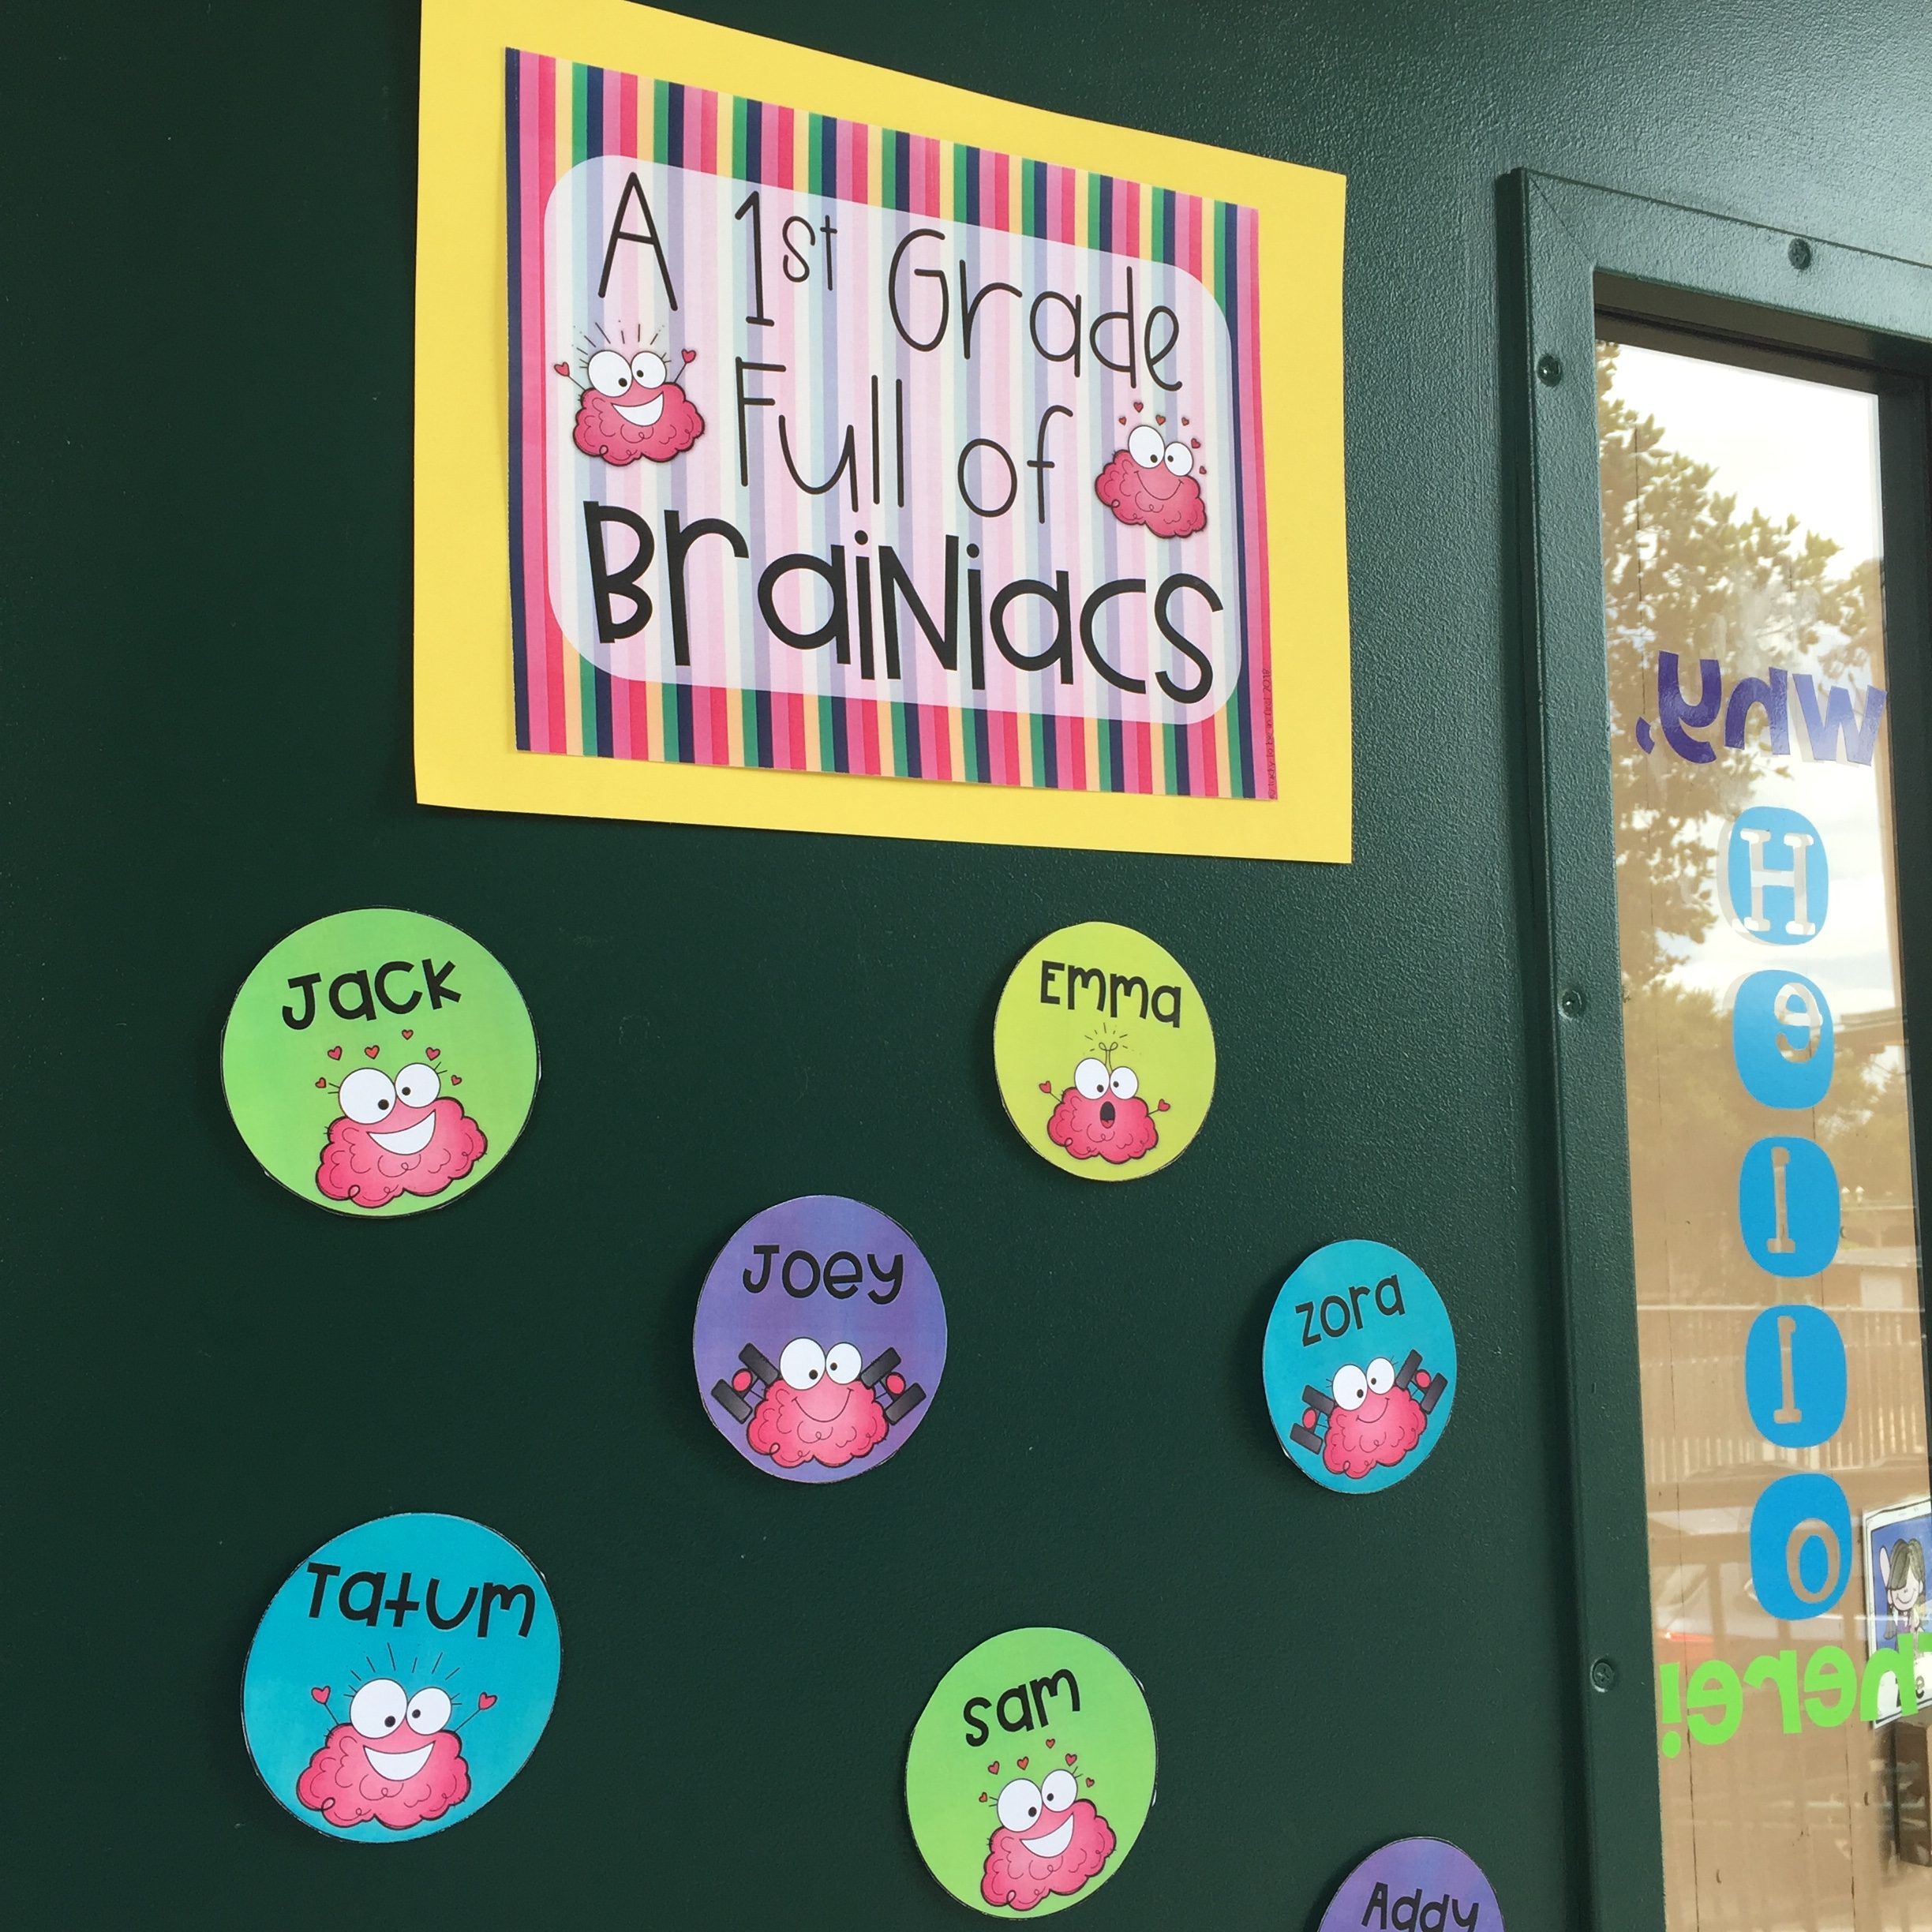 a 1st grade full of brainiacs board for door | Lucky Learning with Molly Lynch 